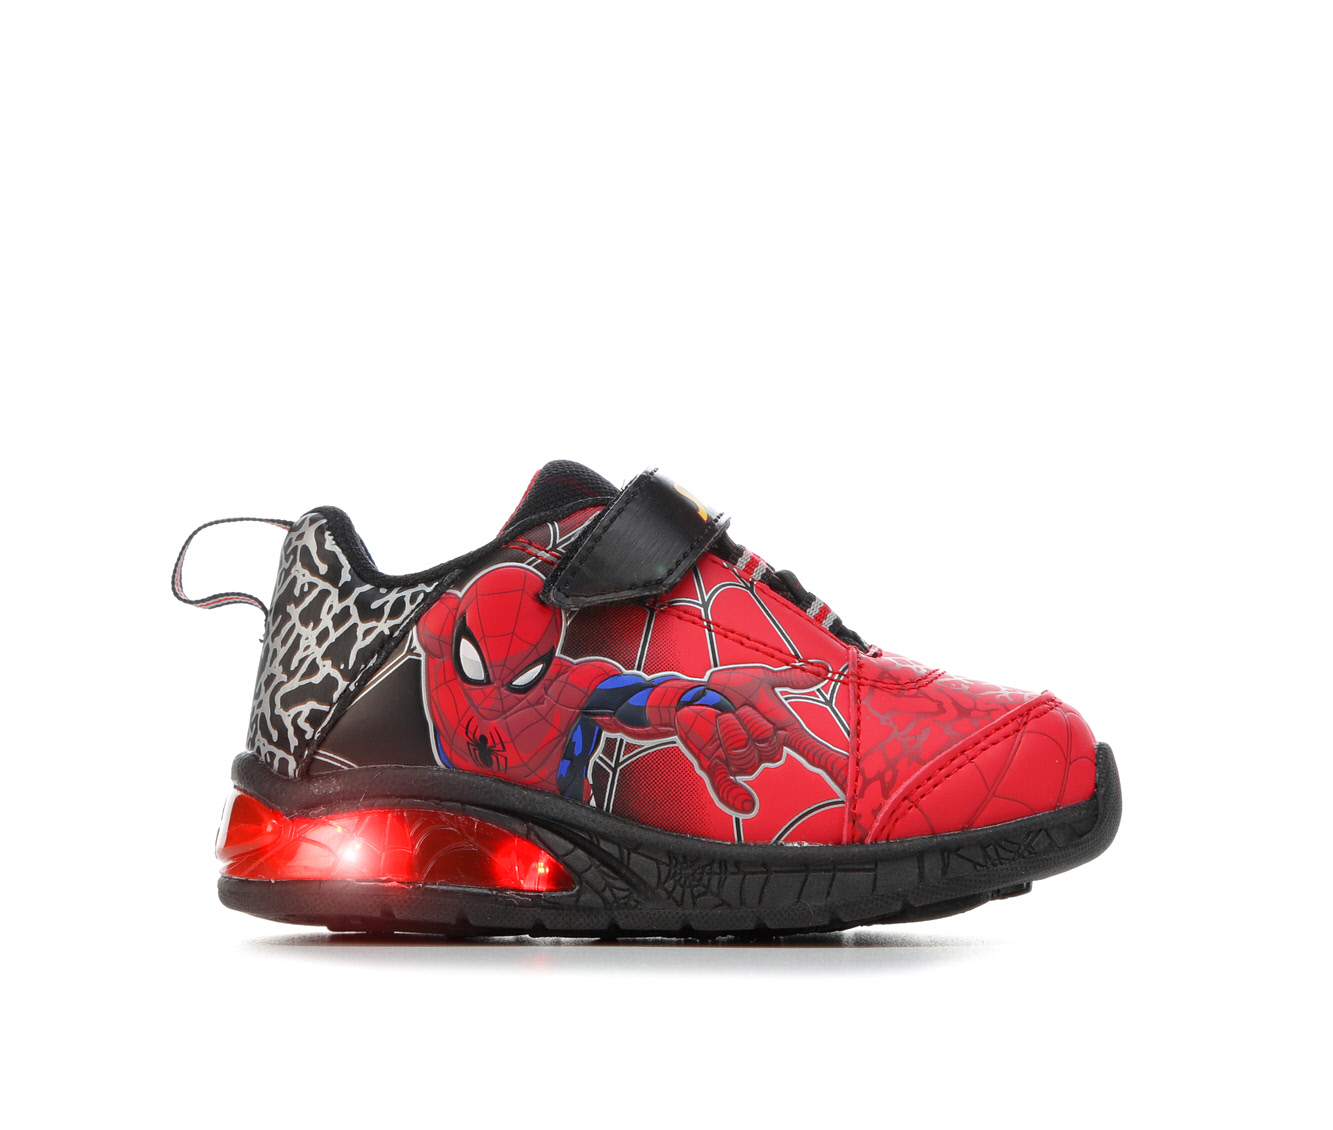 Light-Up Shoes for Boys, Kids' Sneakers | Shoe Carnival